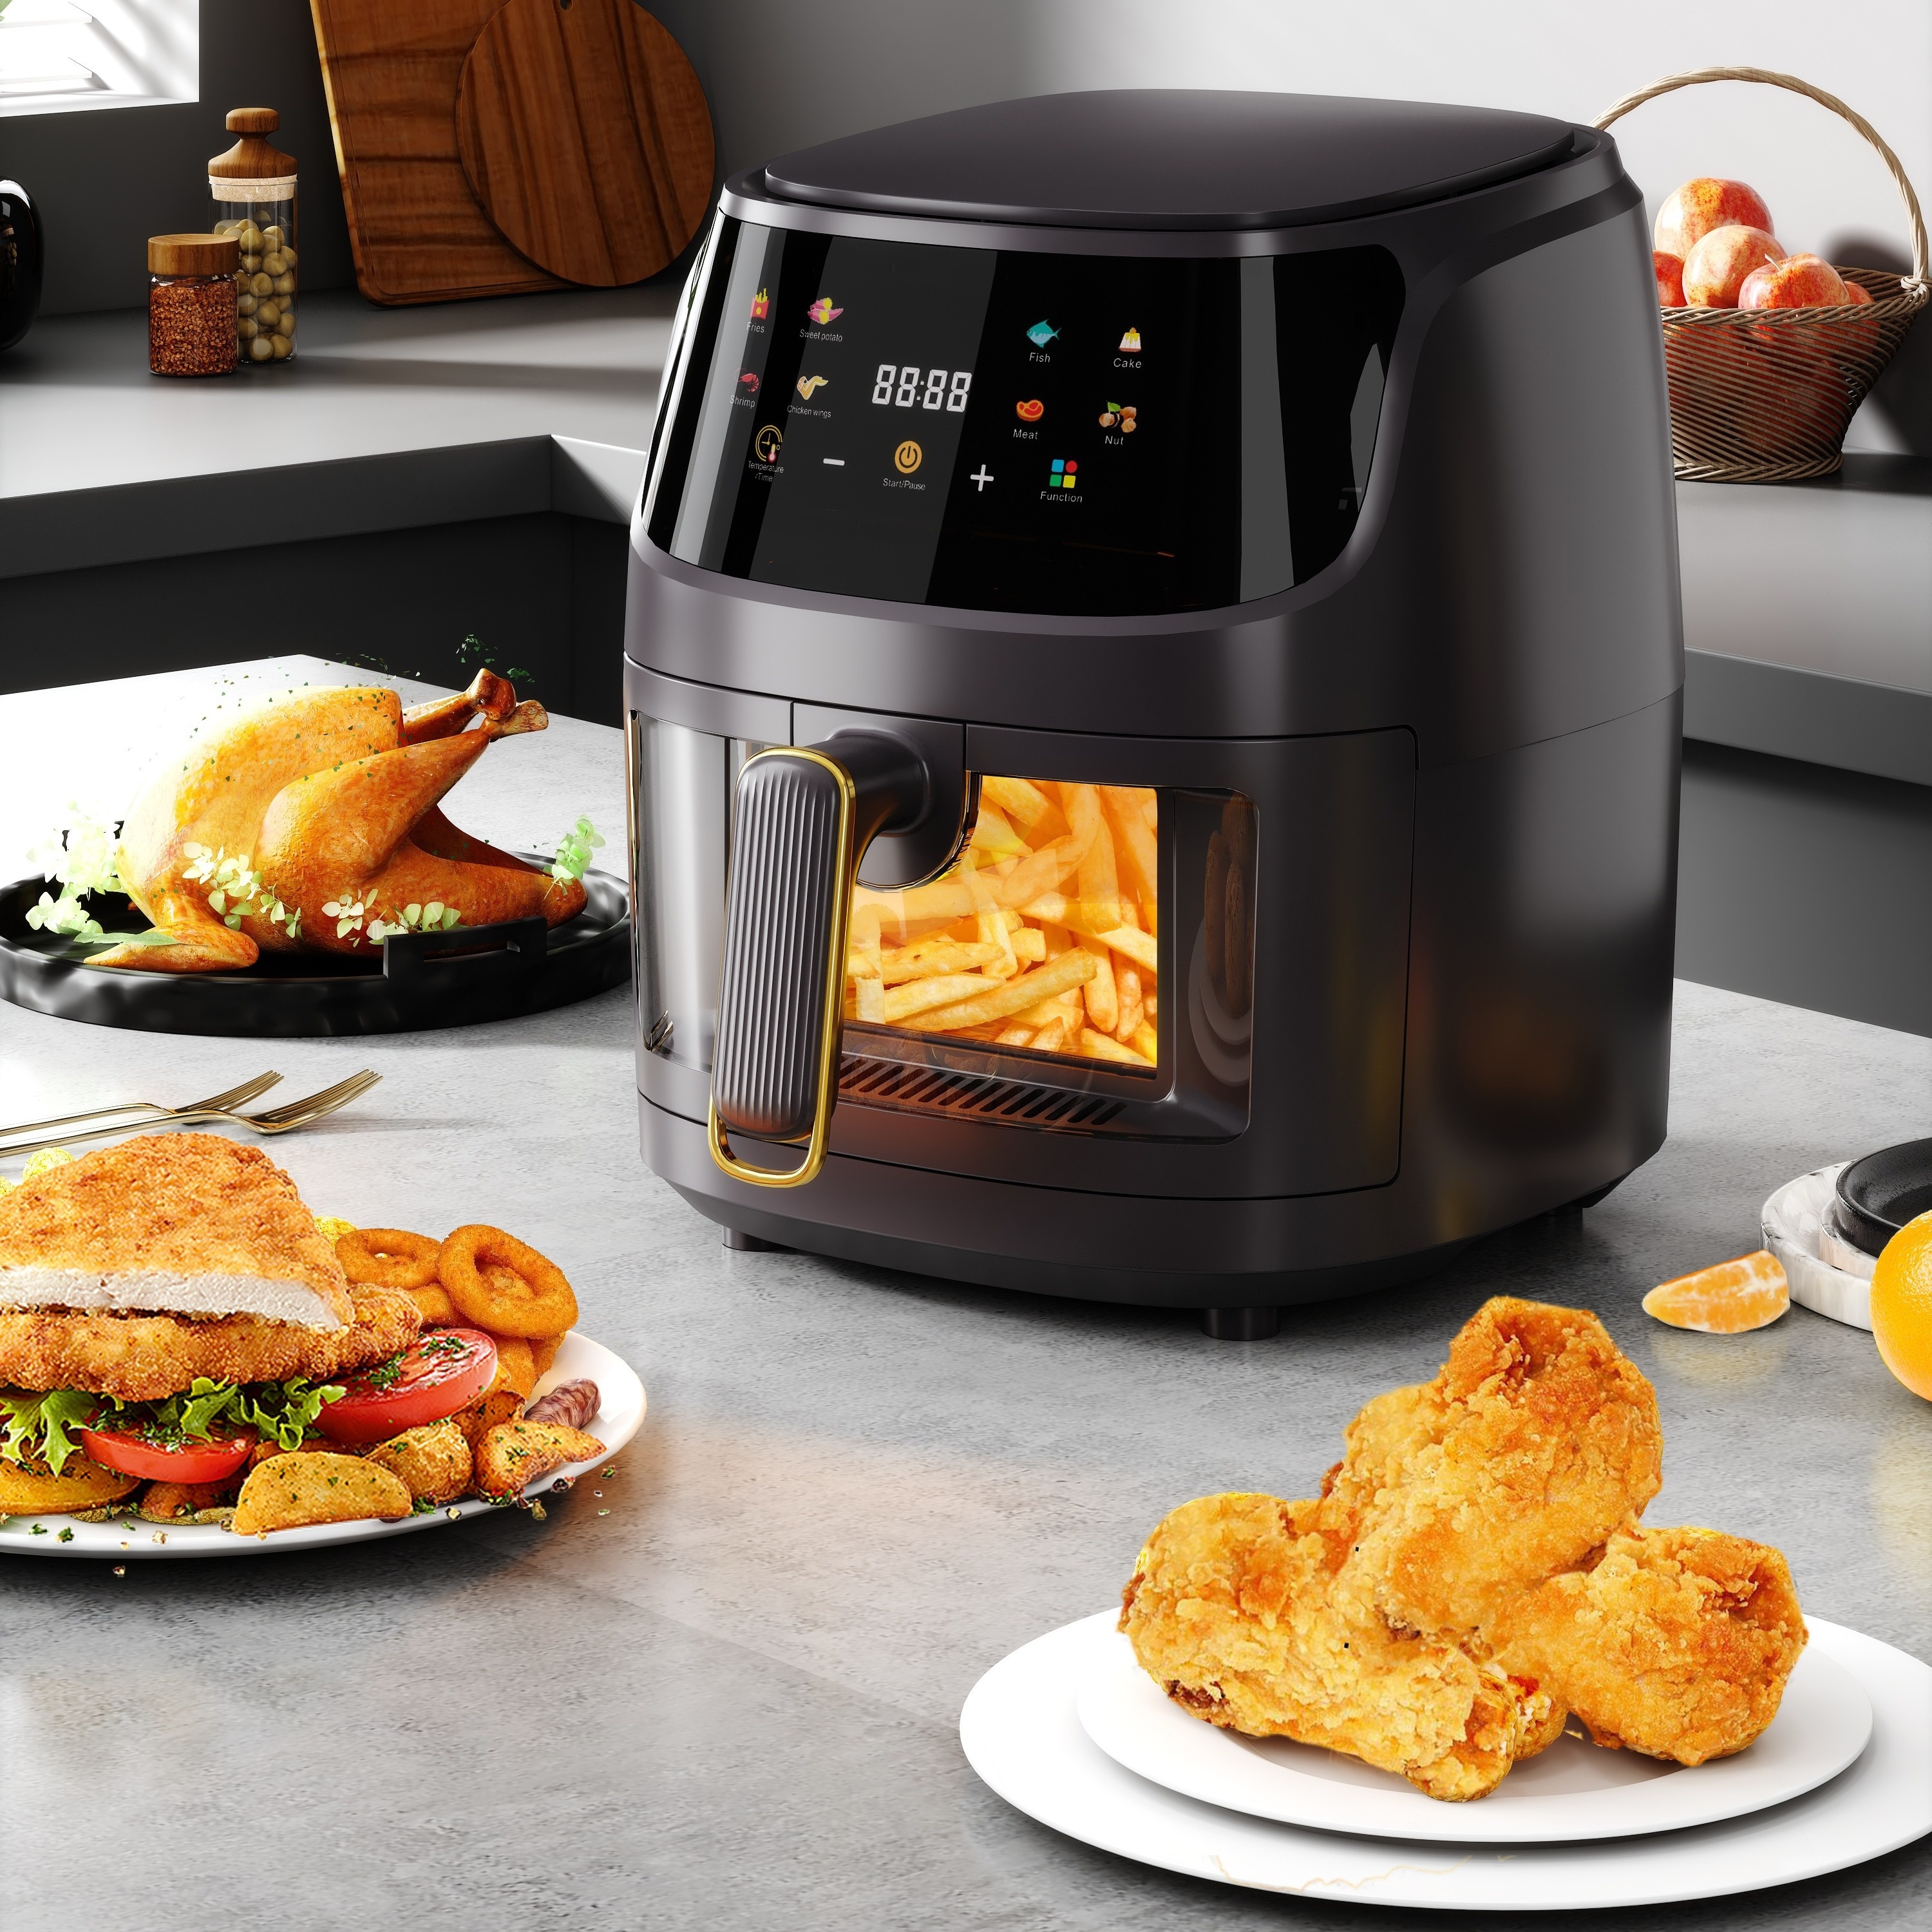 Tovala Smart Oven, 5-in-1 Air Fryer Oven Combo - Air Fry, Bake, Bake &  Reheat - Smartphone Console Face Convection - AliExpress